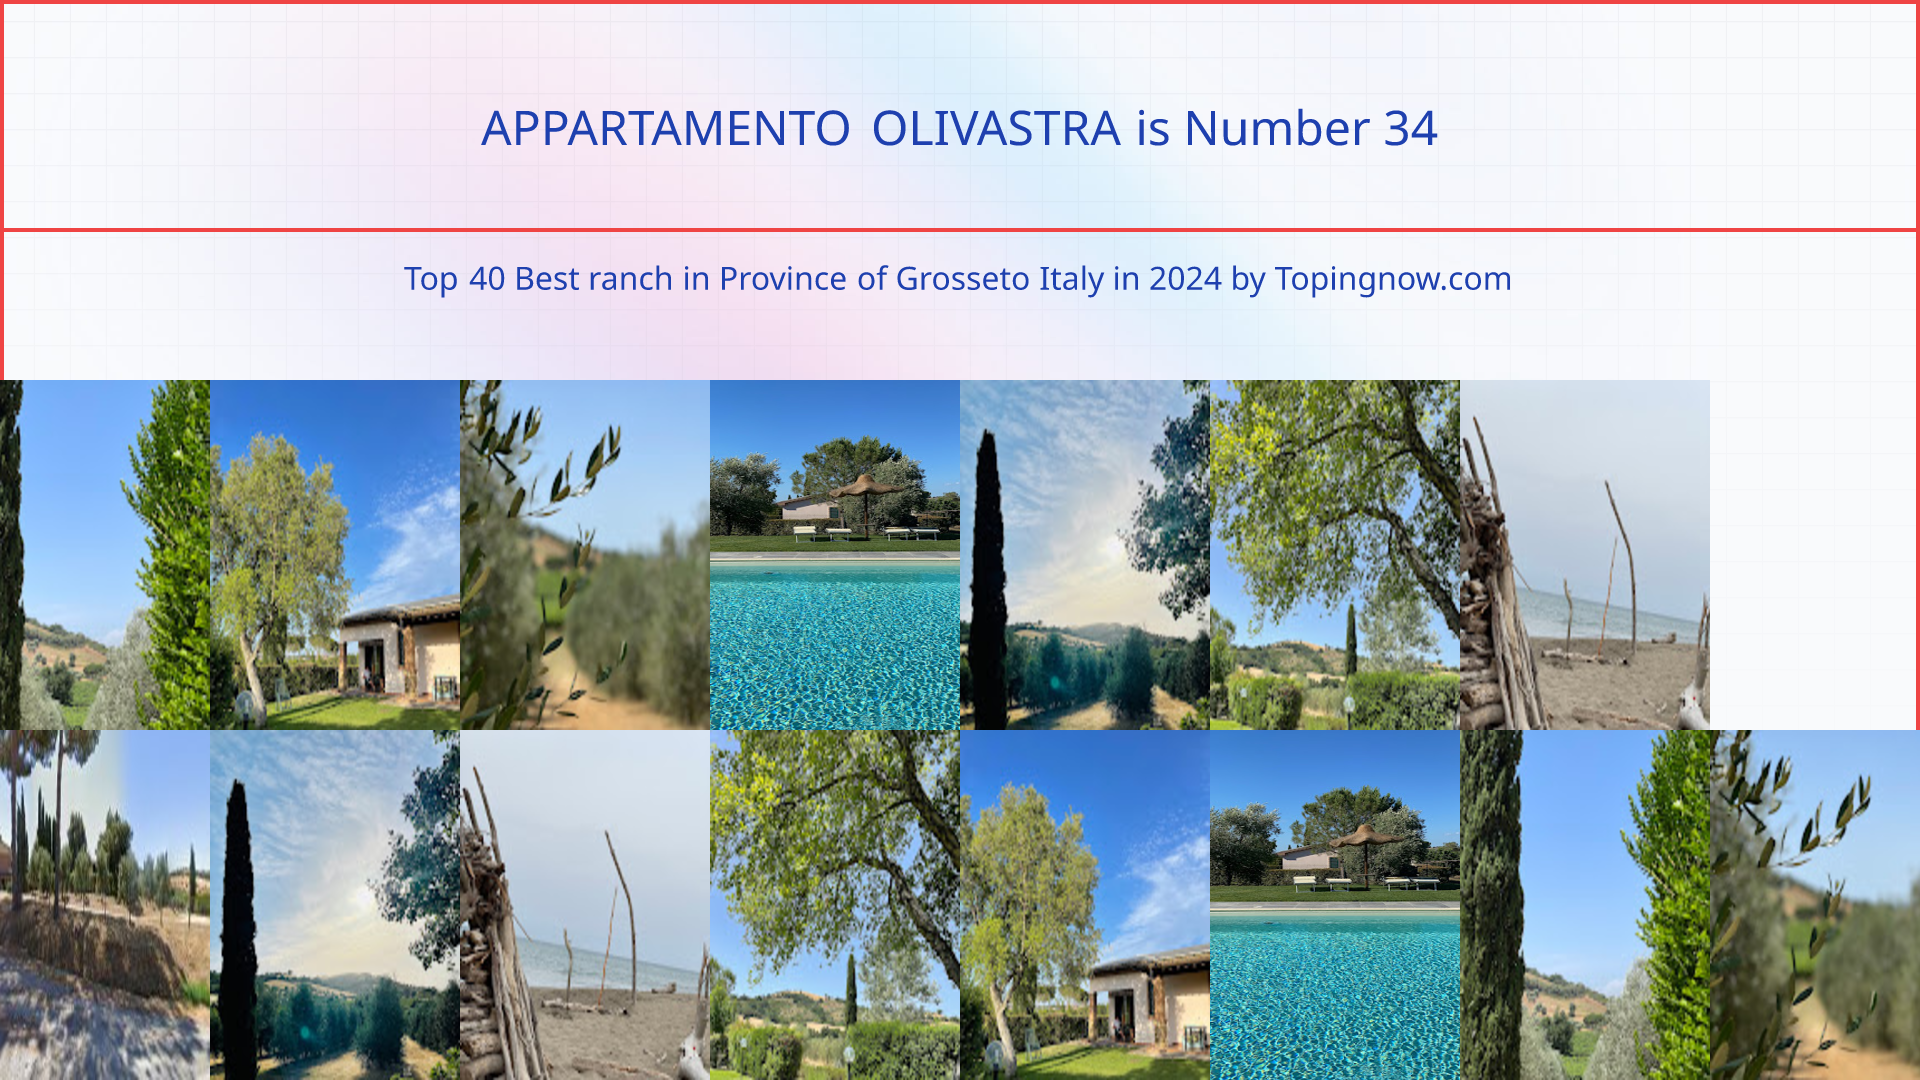 APPARTAMENTO OLIVASTRA: Top 40 Best ranch in Province of Grosseto Italy in 2024